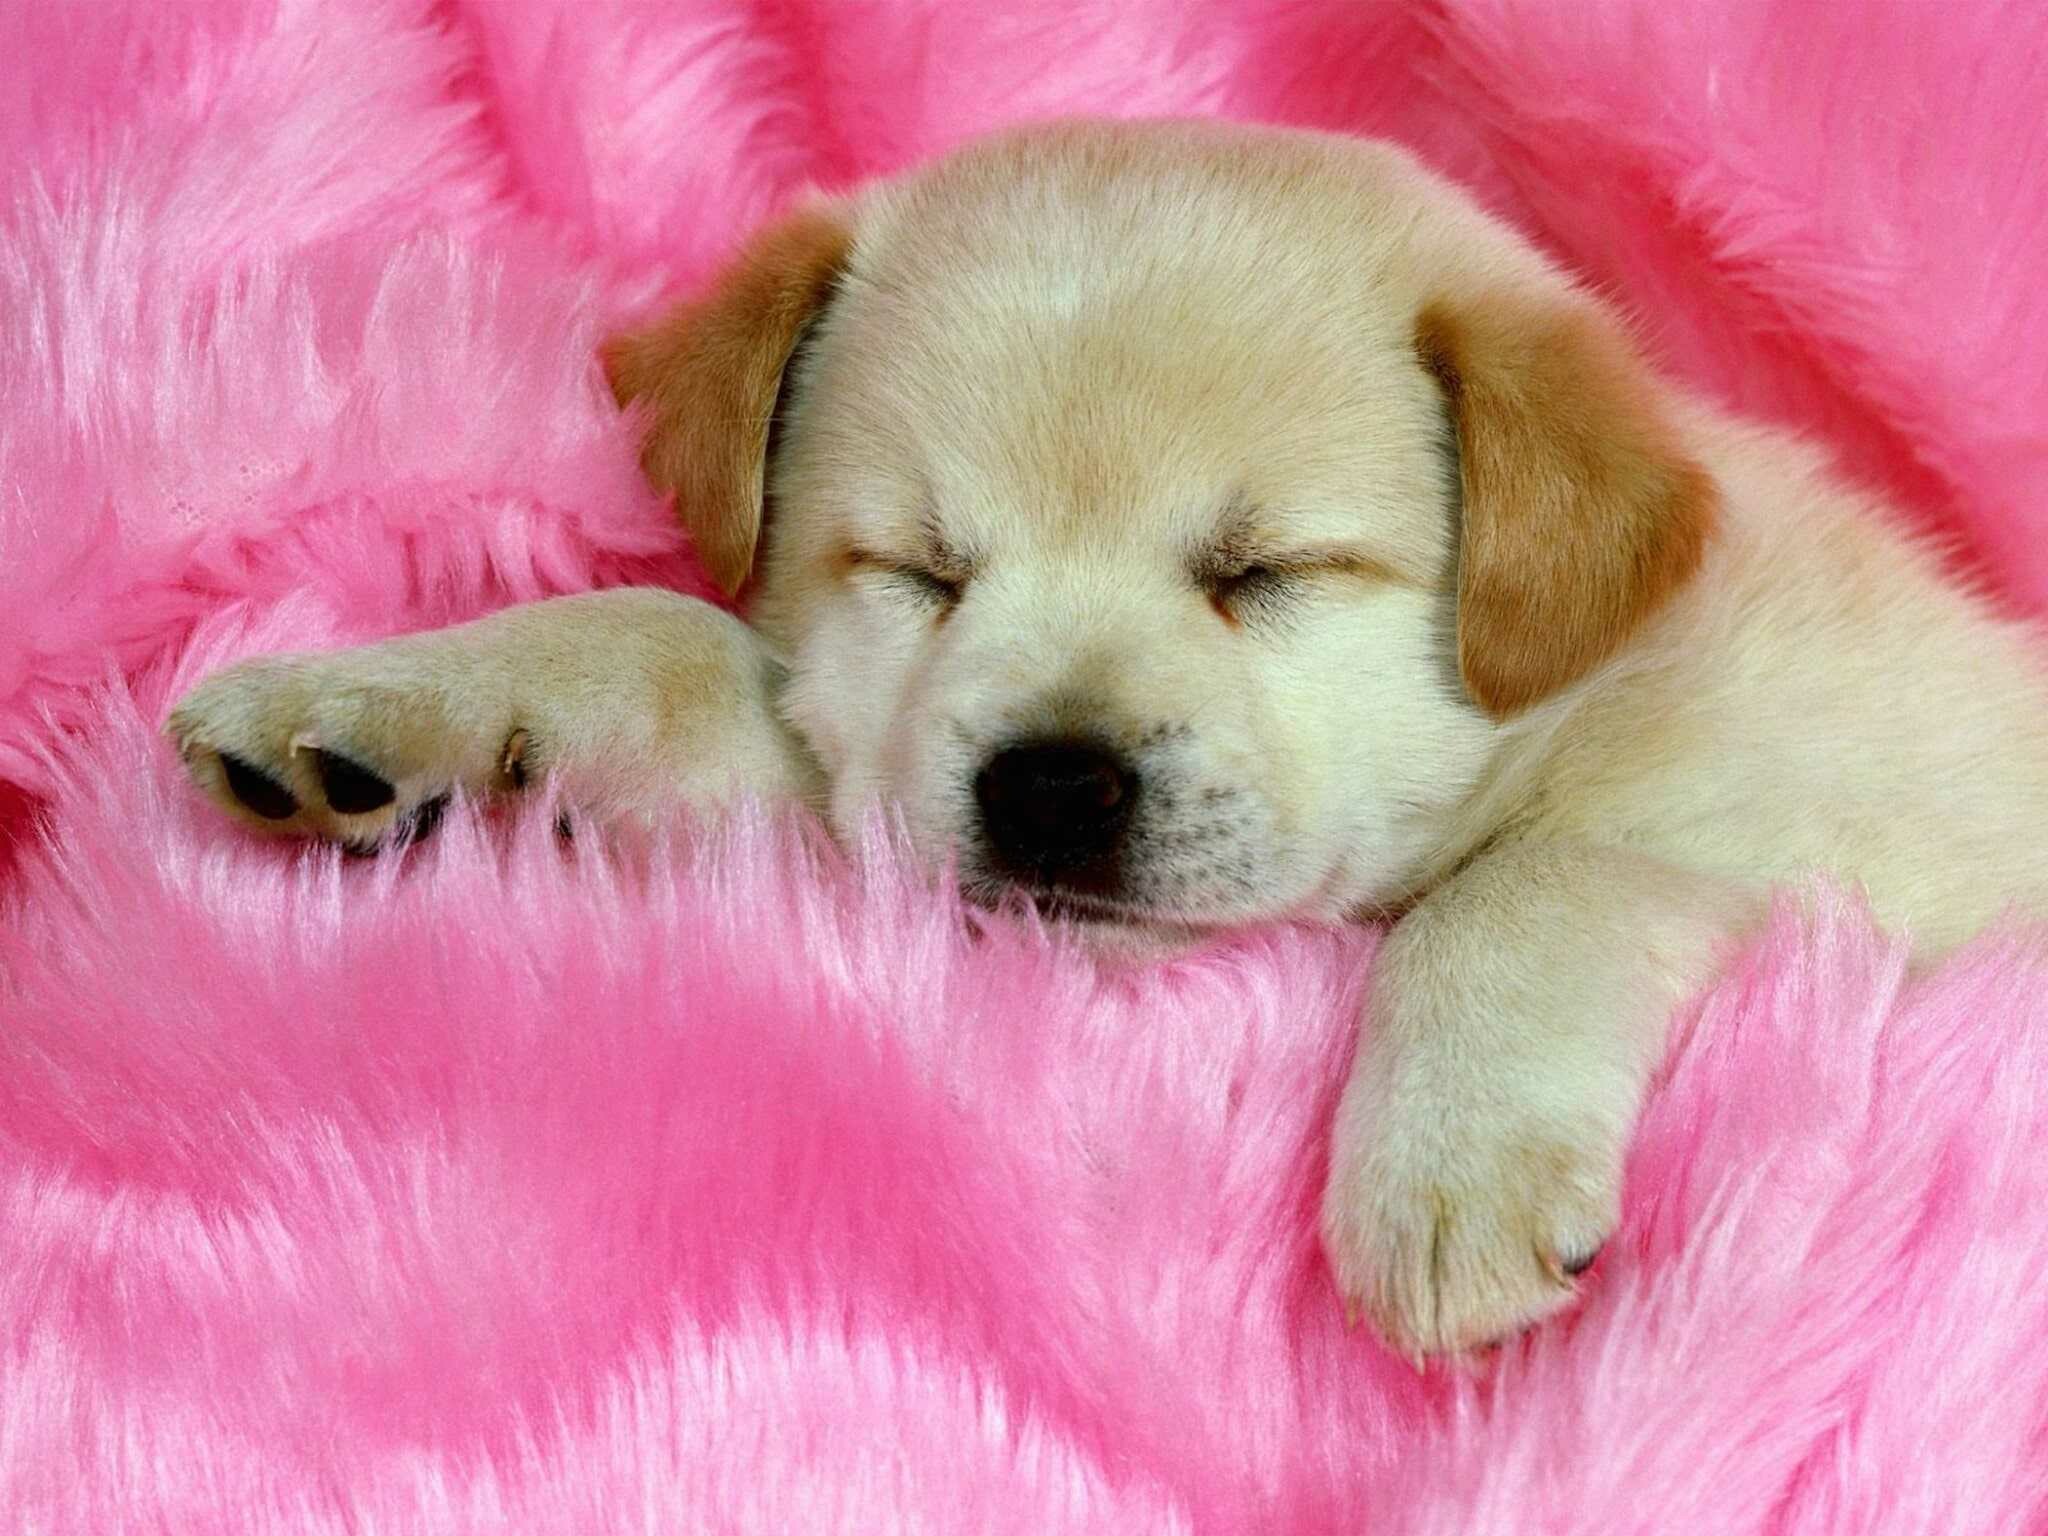 Puppy: A juvenile dog, Spend the large majority of their time sleeping and the rest feeding. 2050x1540 HD Background.